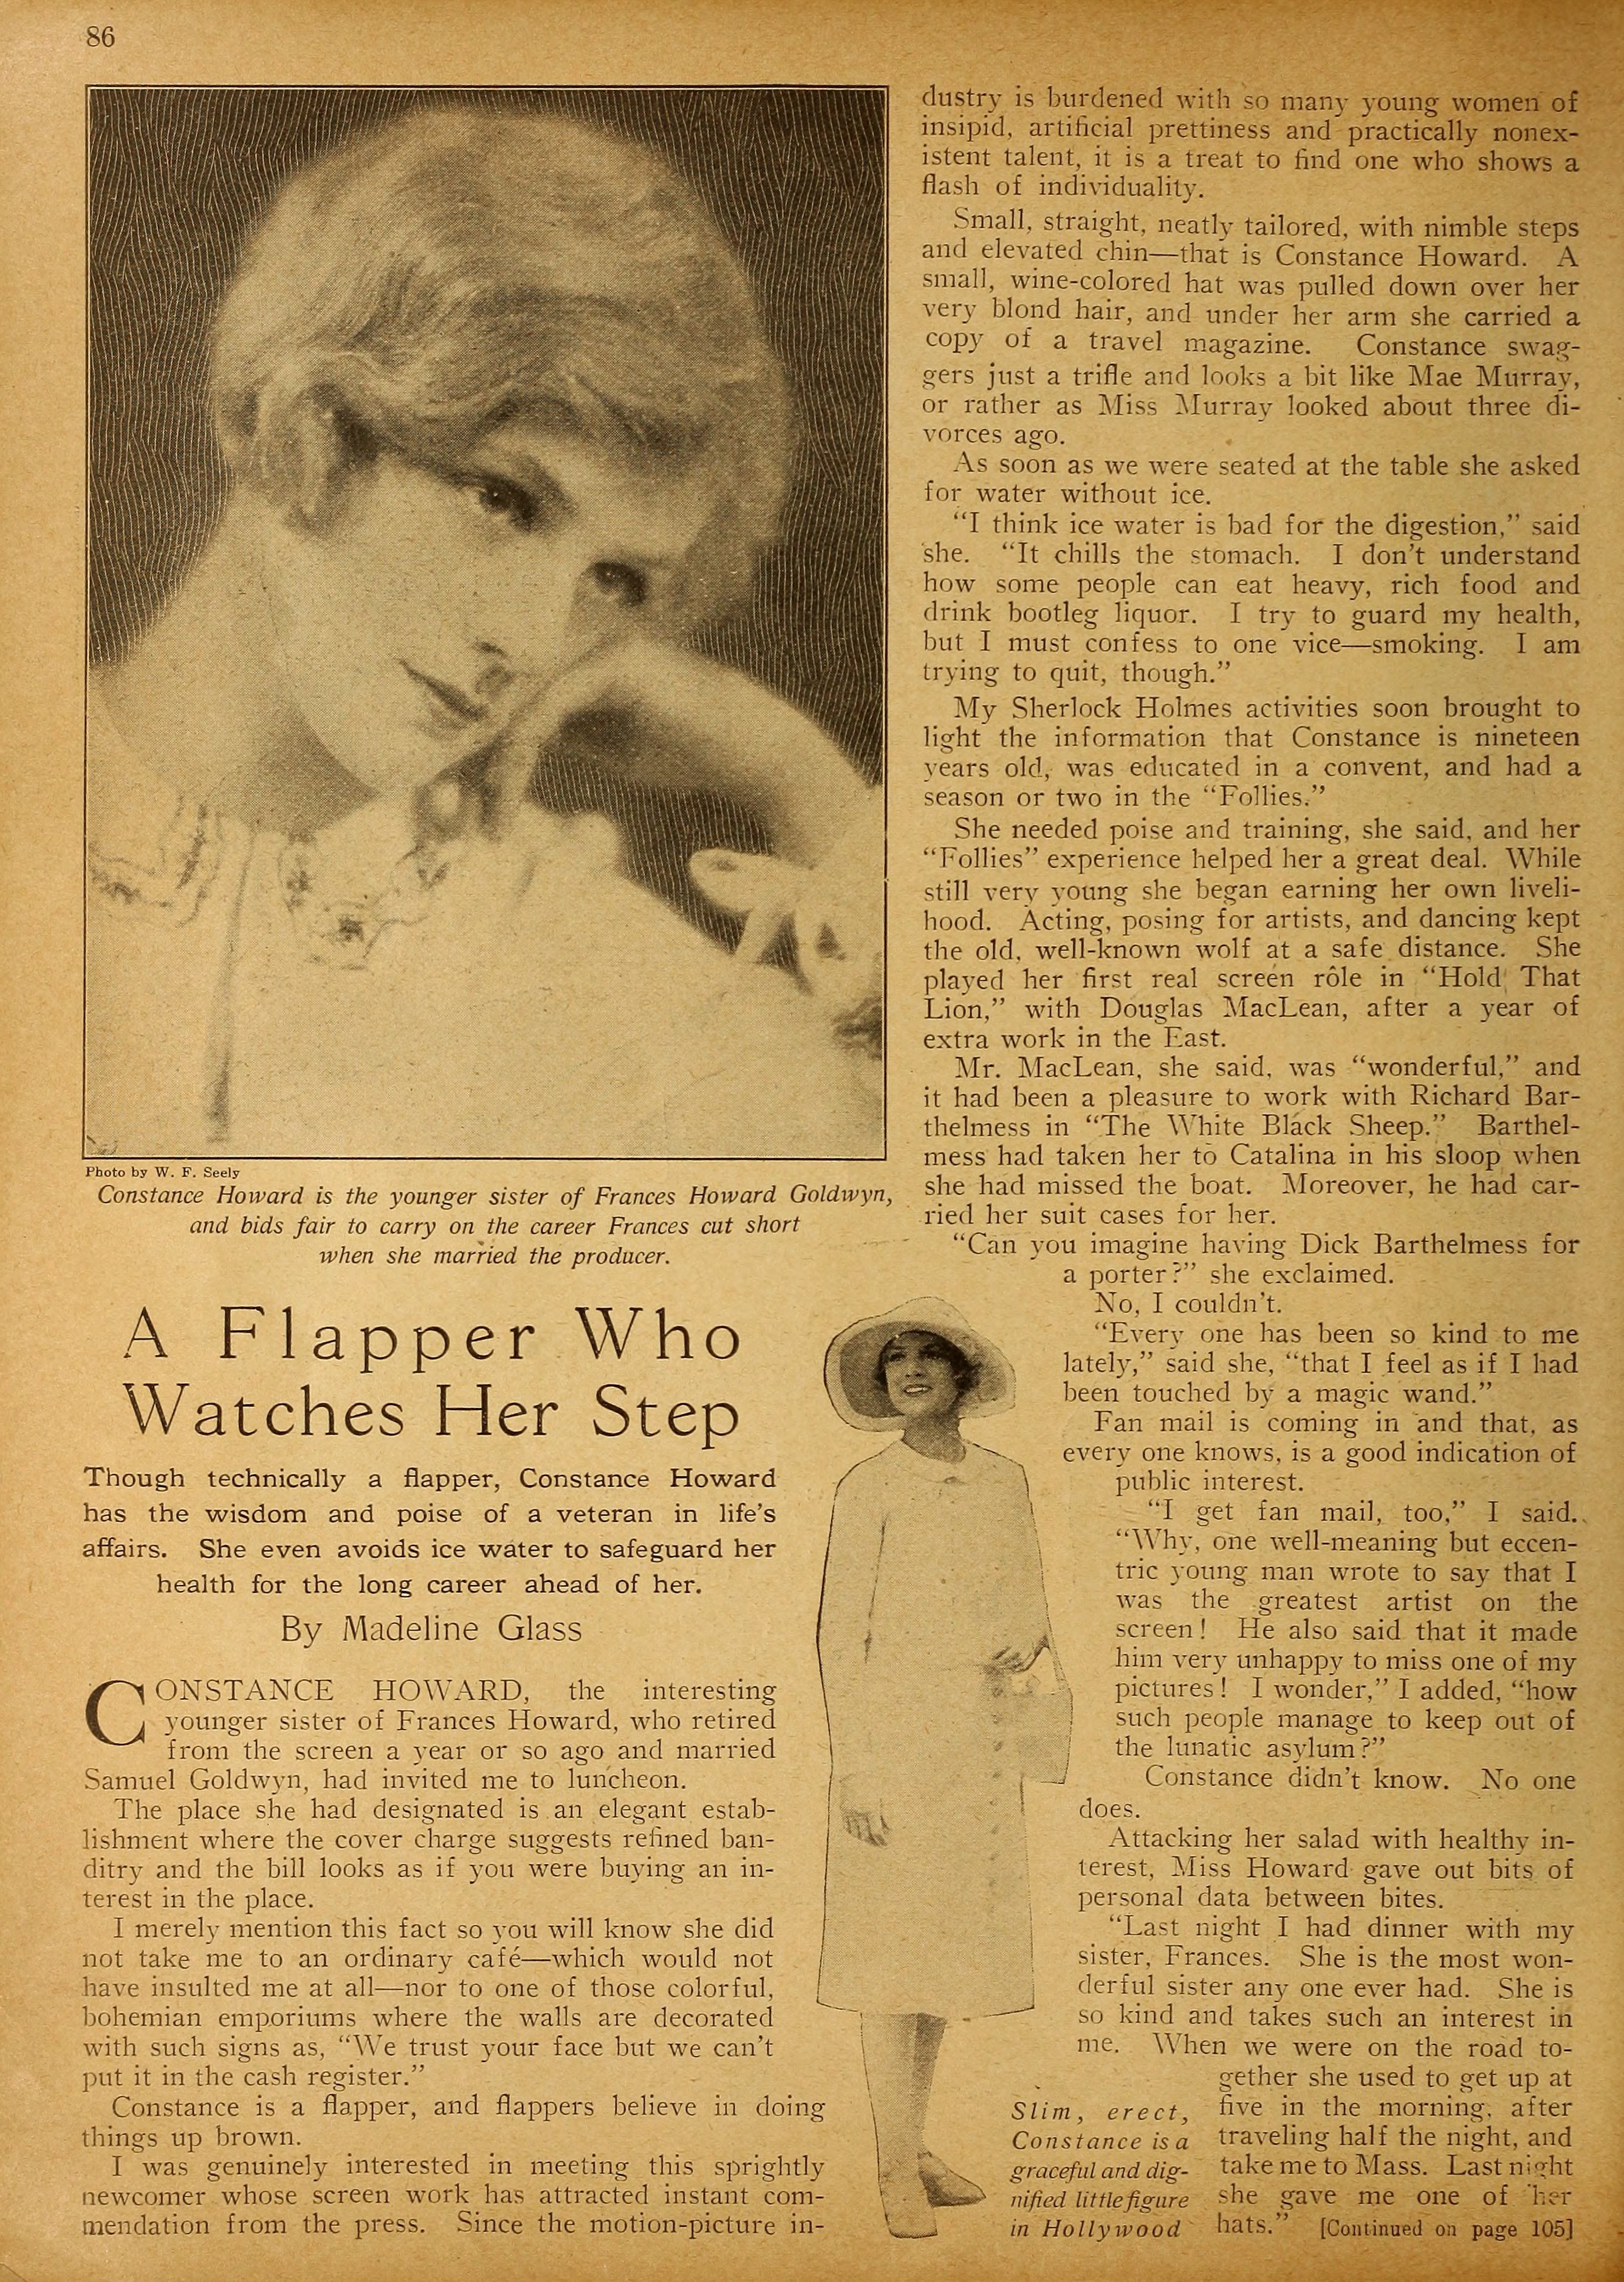 Constance Howard — A Flapper Who Watches Her Step (1927) | www.vintoz.com